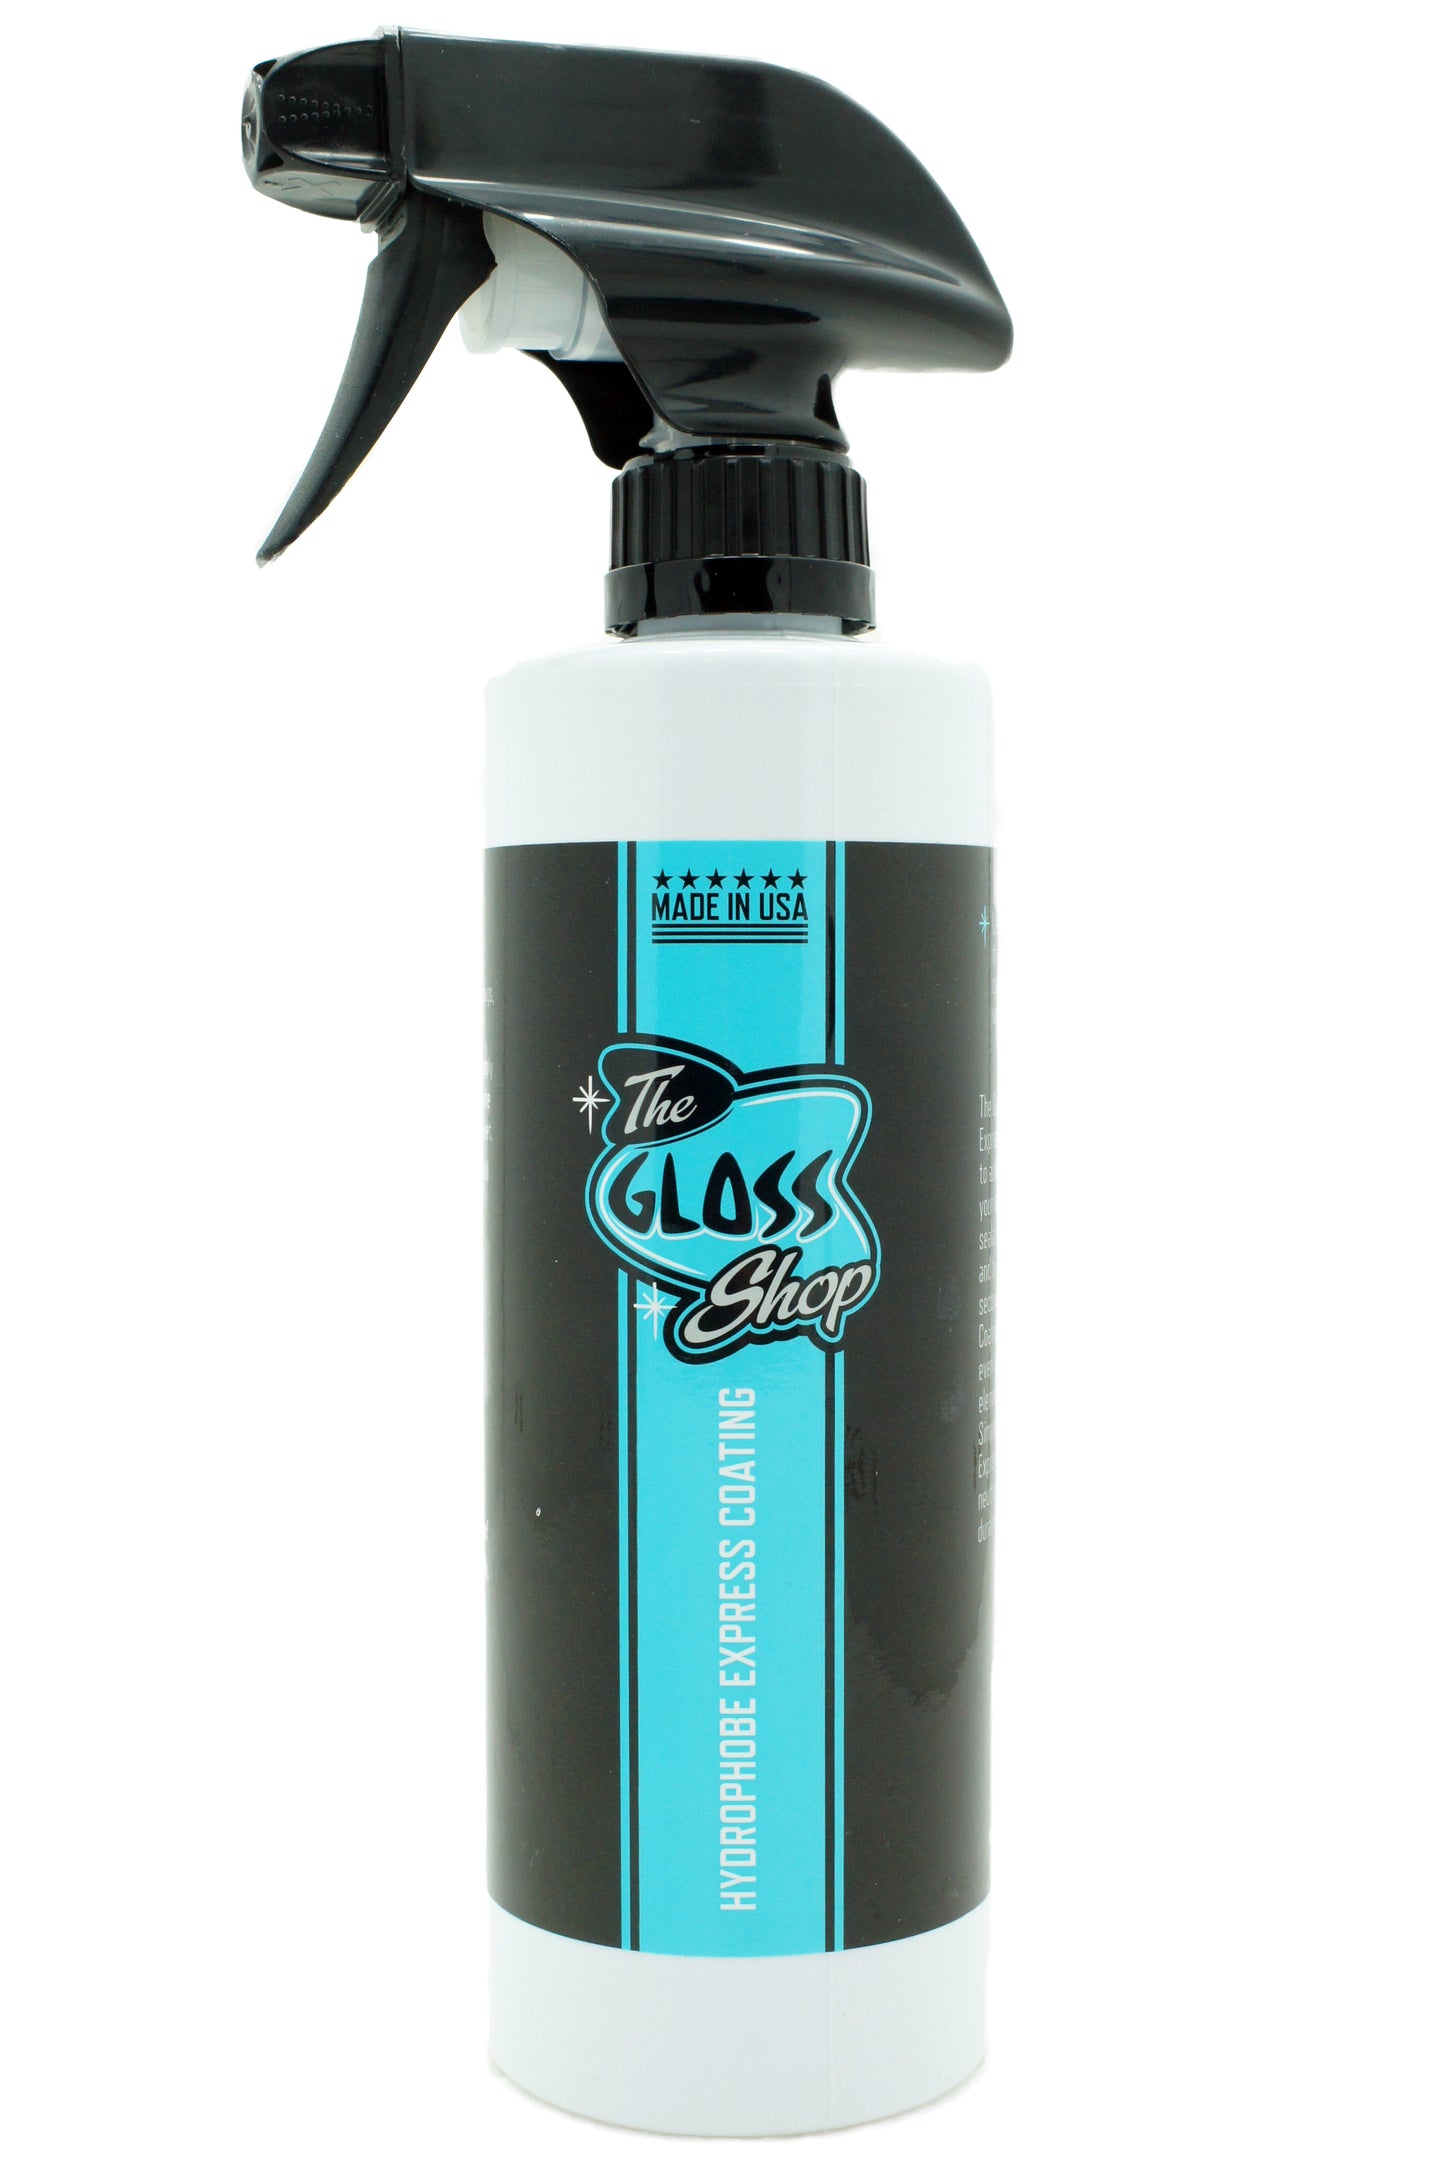 The Gloss Shop Hydrophobe Express Coating | 16 Ounce